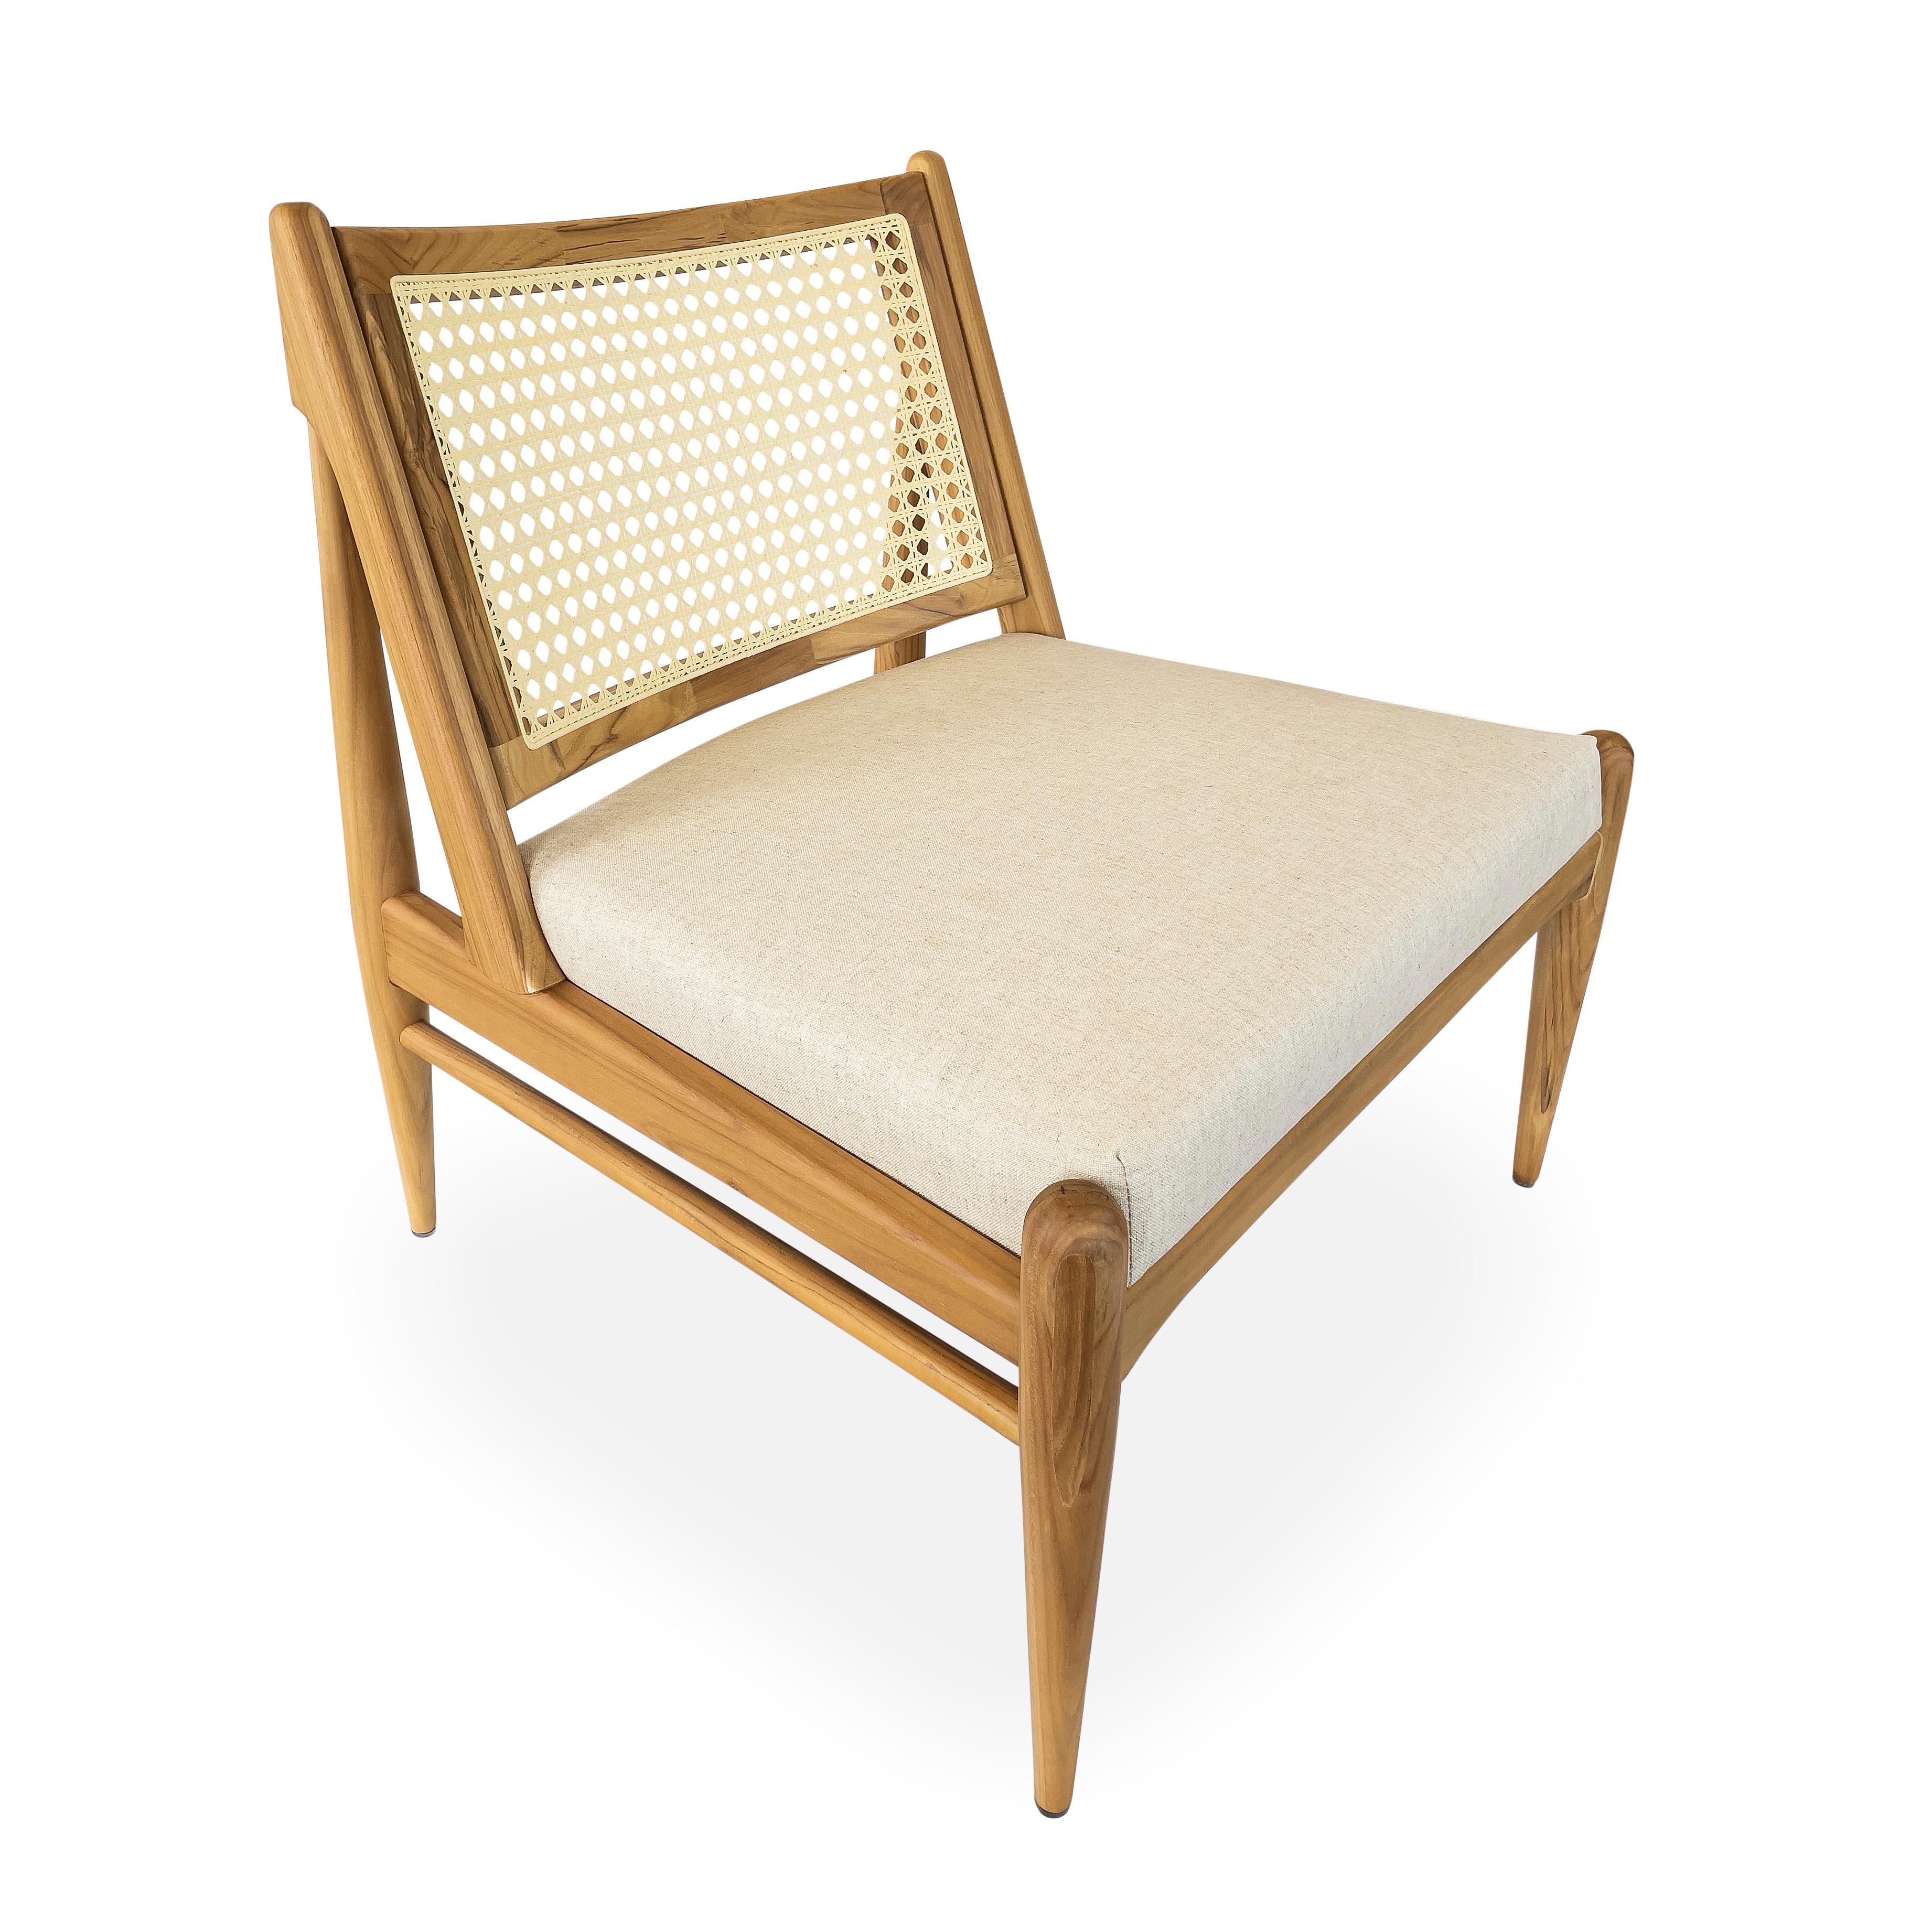 Donna Cane-Back Chair in Teak Wood Finish with Oatmeal Fabric Seat For Sale 3